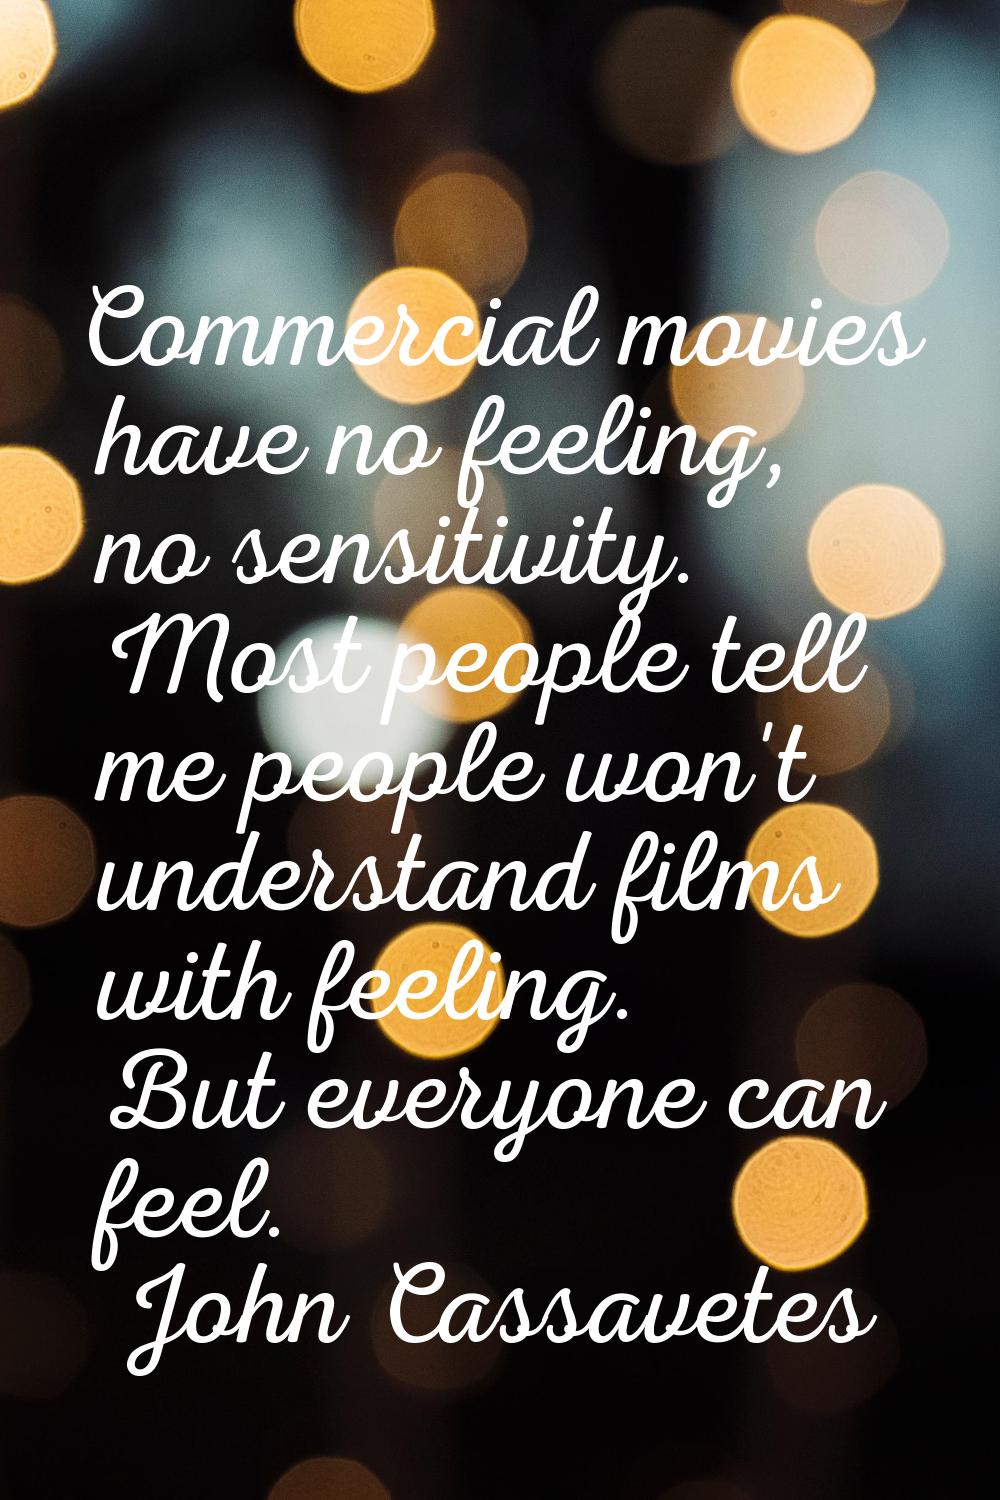 Commercial movies have no feeling, no sensitivity. Most people tell me people won't understand film